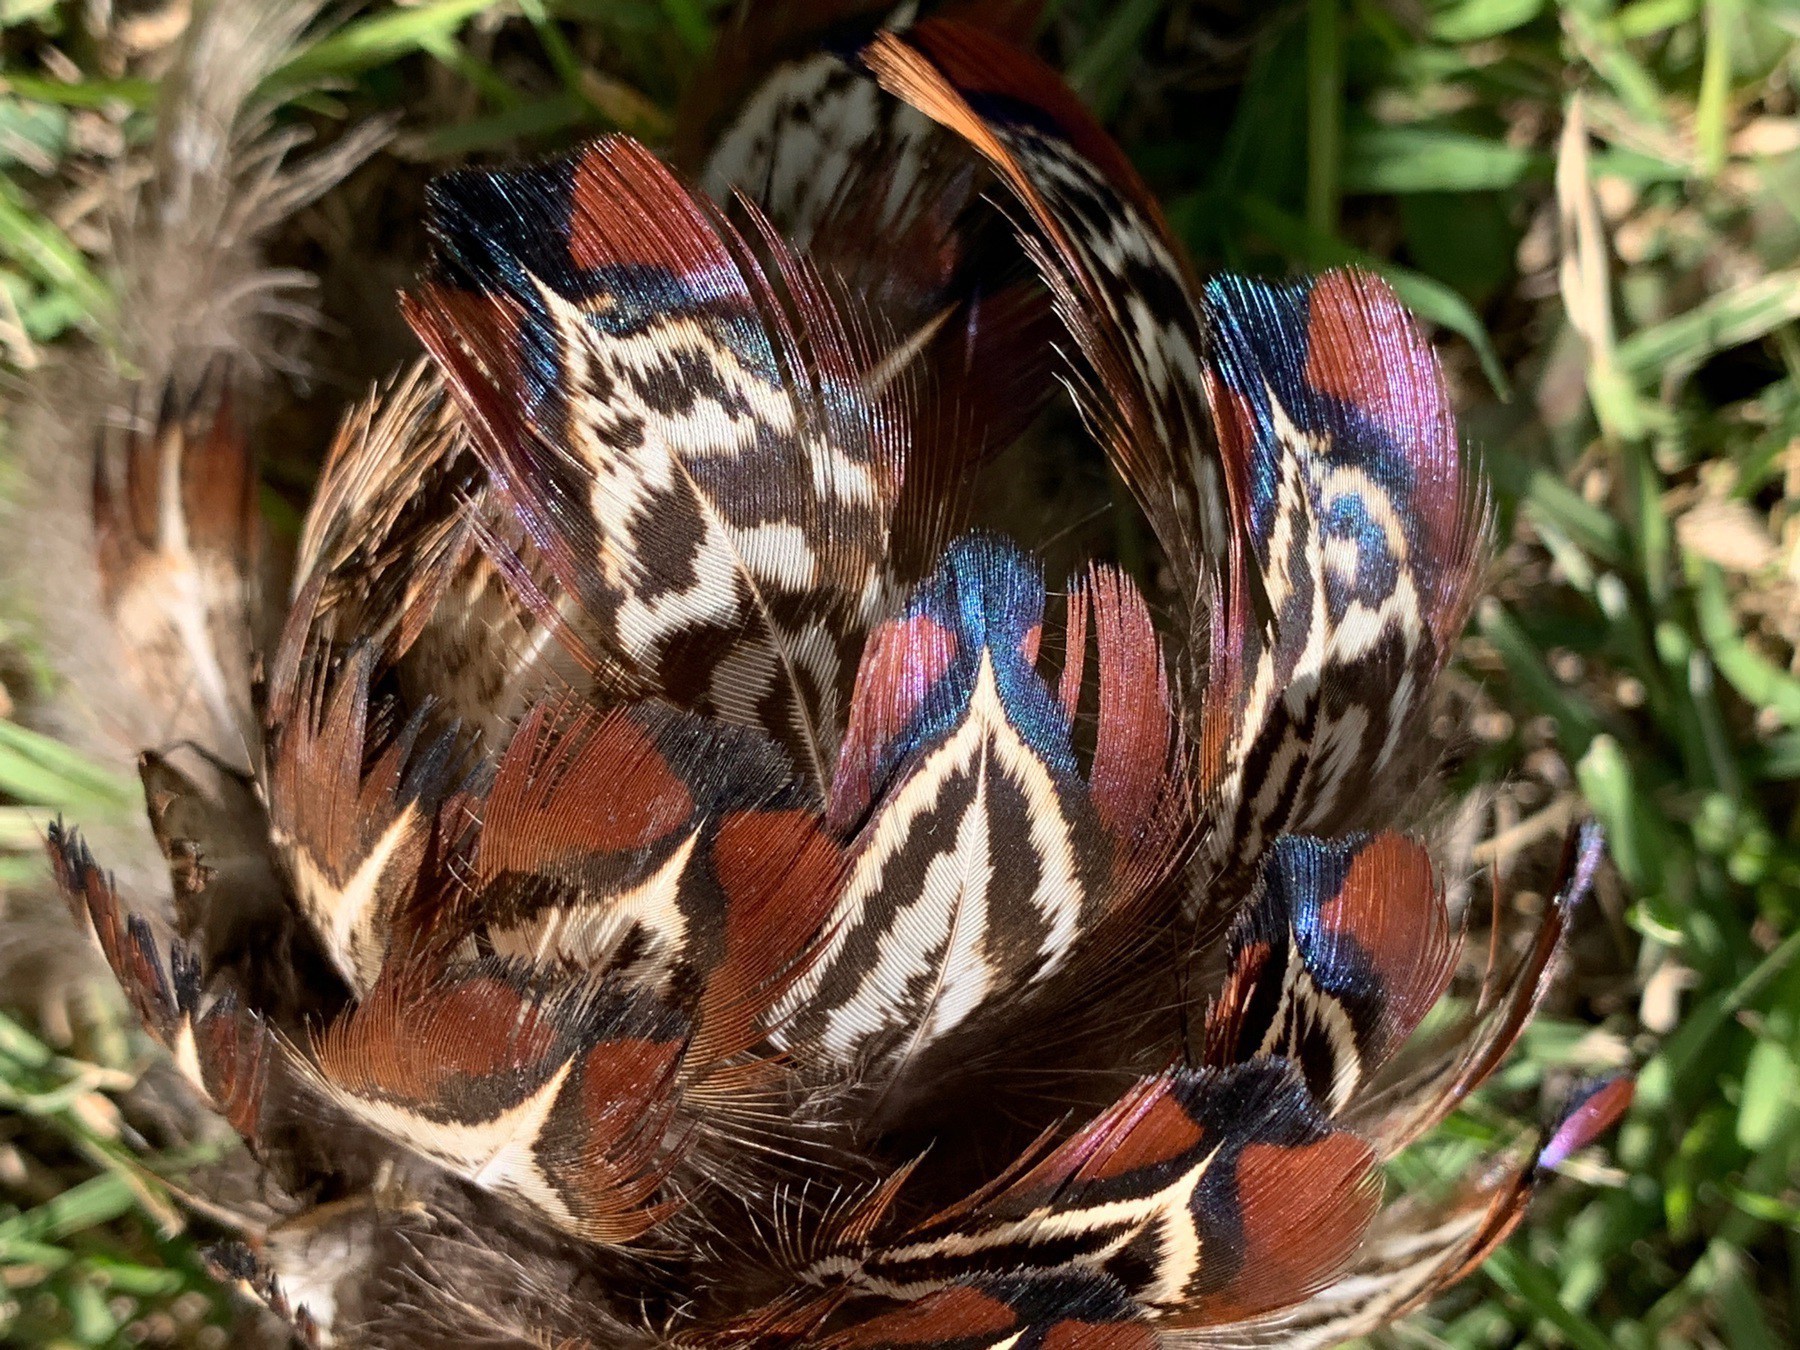 ball of feathers, most brown, some iridescent